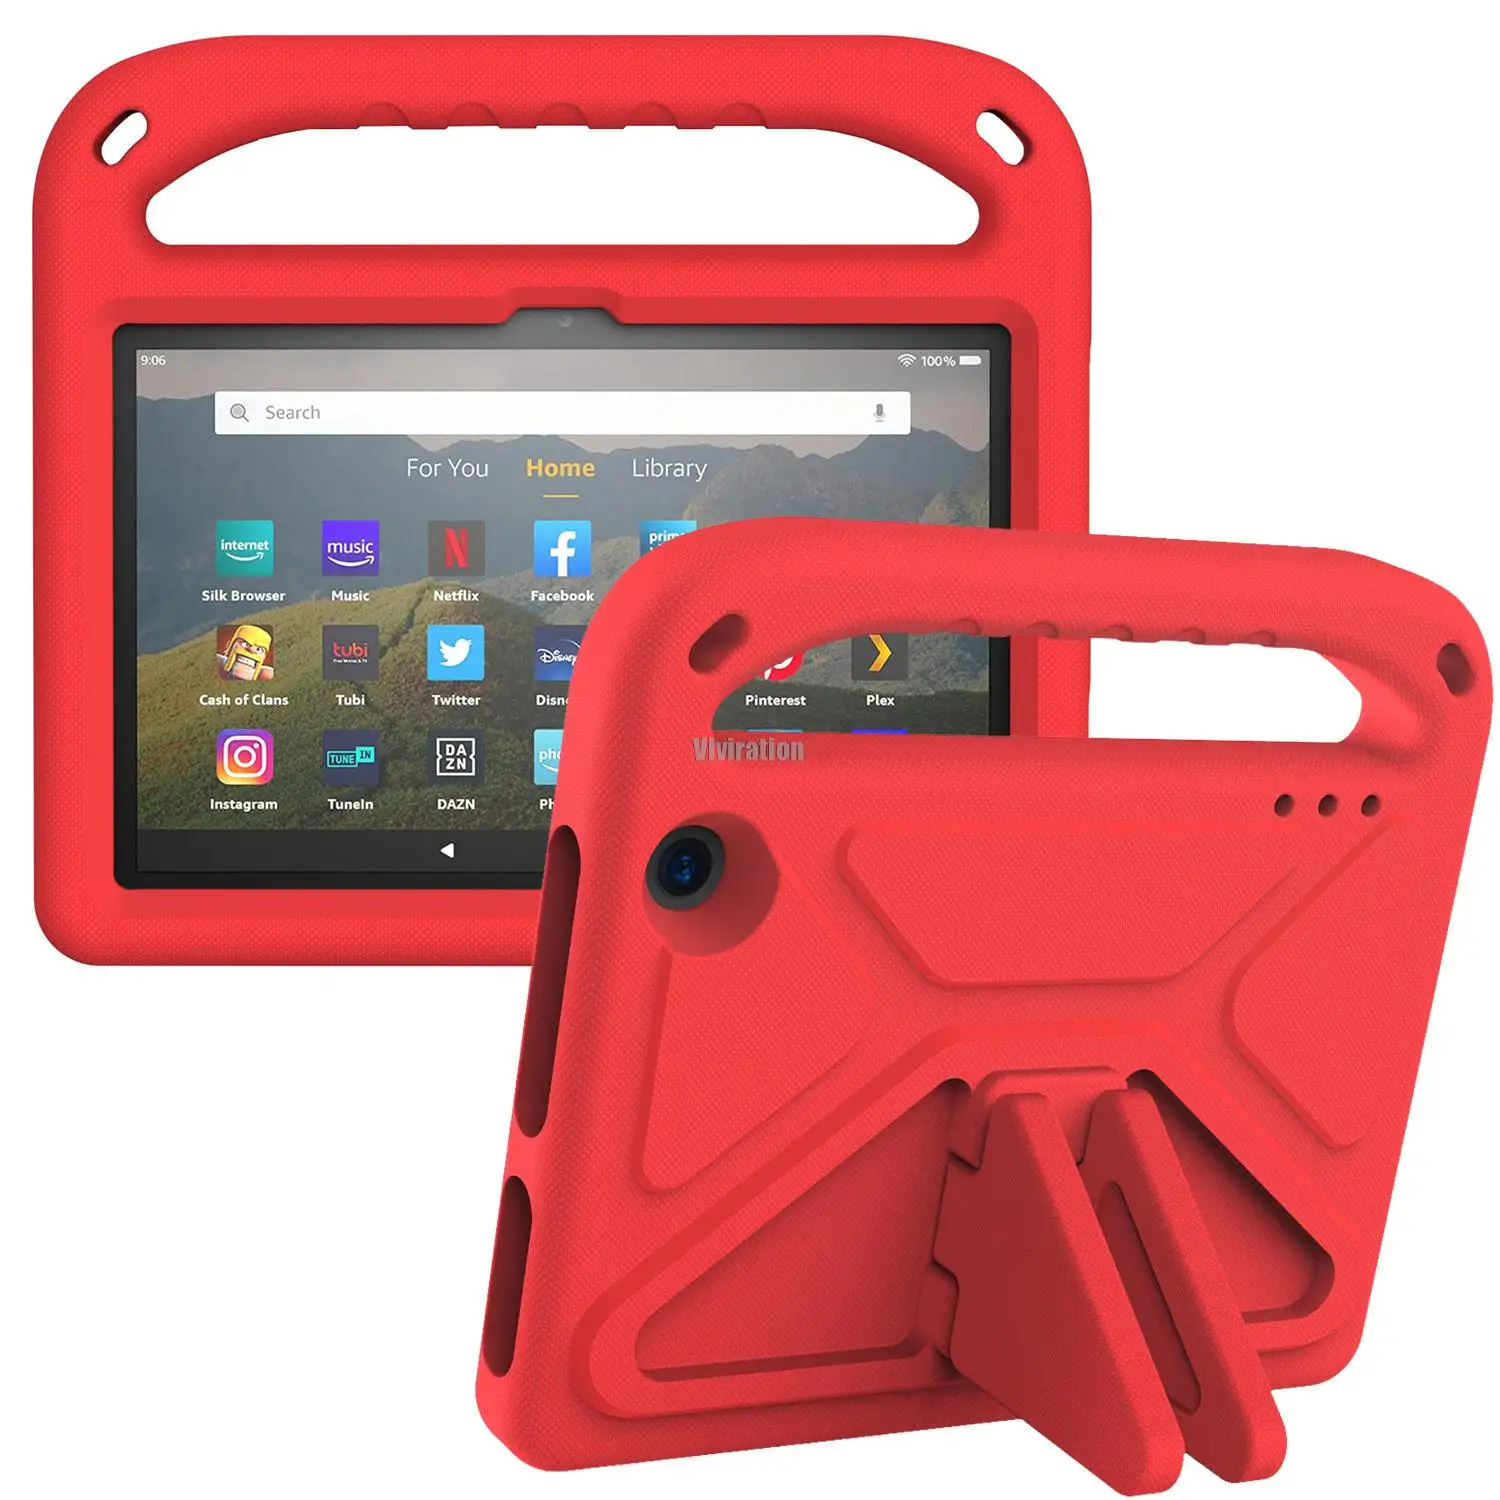 EVA Tablet Case For Kindle Fire 7 12th Gen 2022 HD7 Kid Safe Protect Portable Shell Stand Hard Cover Pouch Gift Tab Accesssories